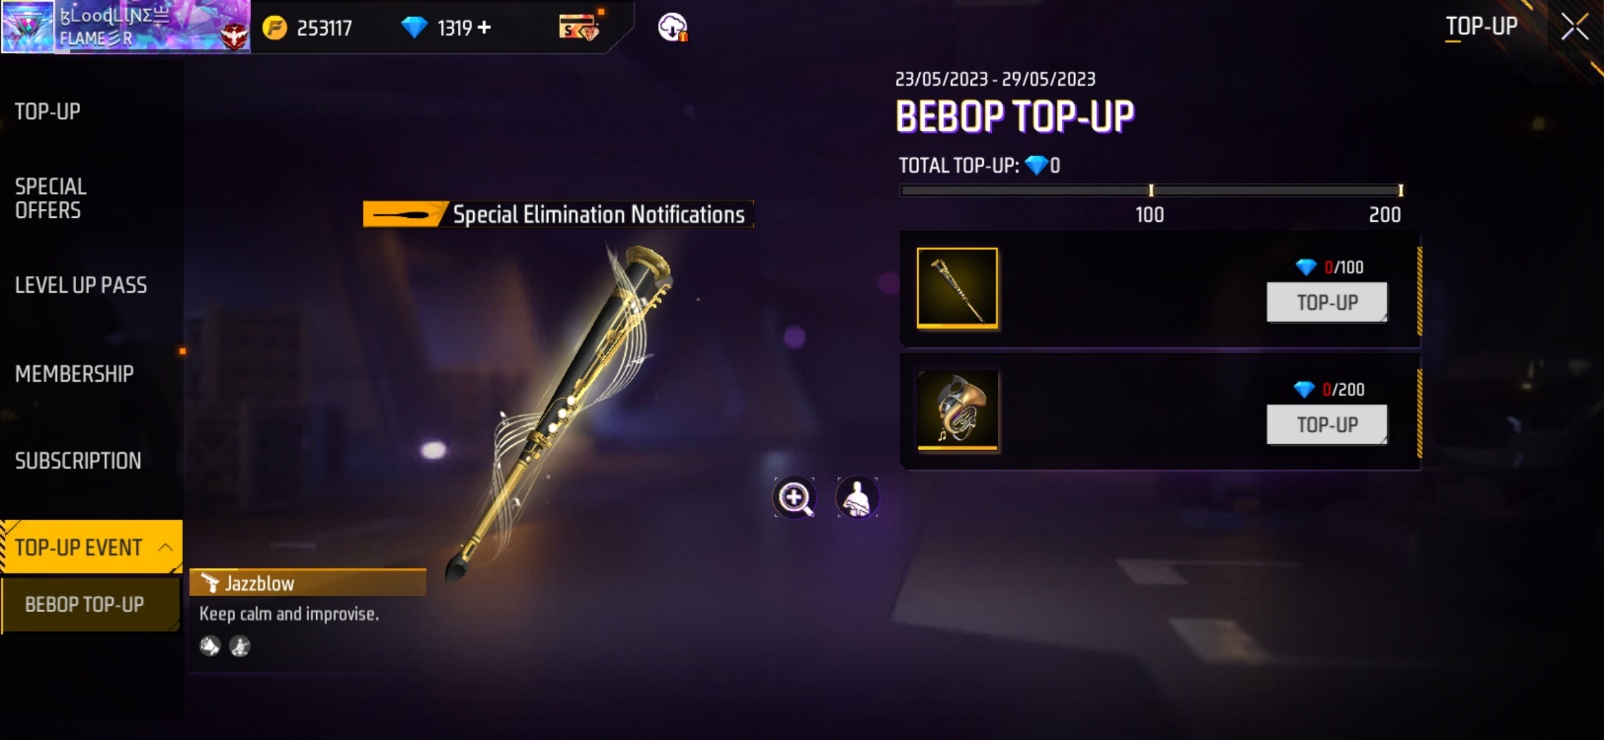 New Top-up Event In Free Fire Max: The Bebop Top-up Event